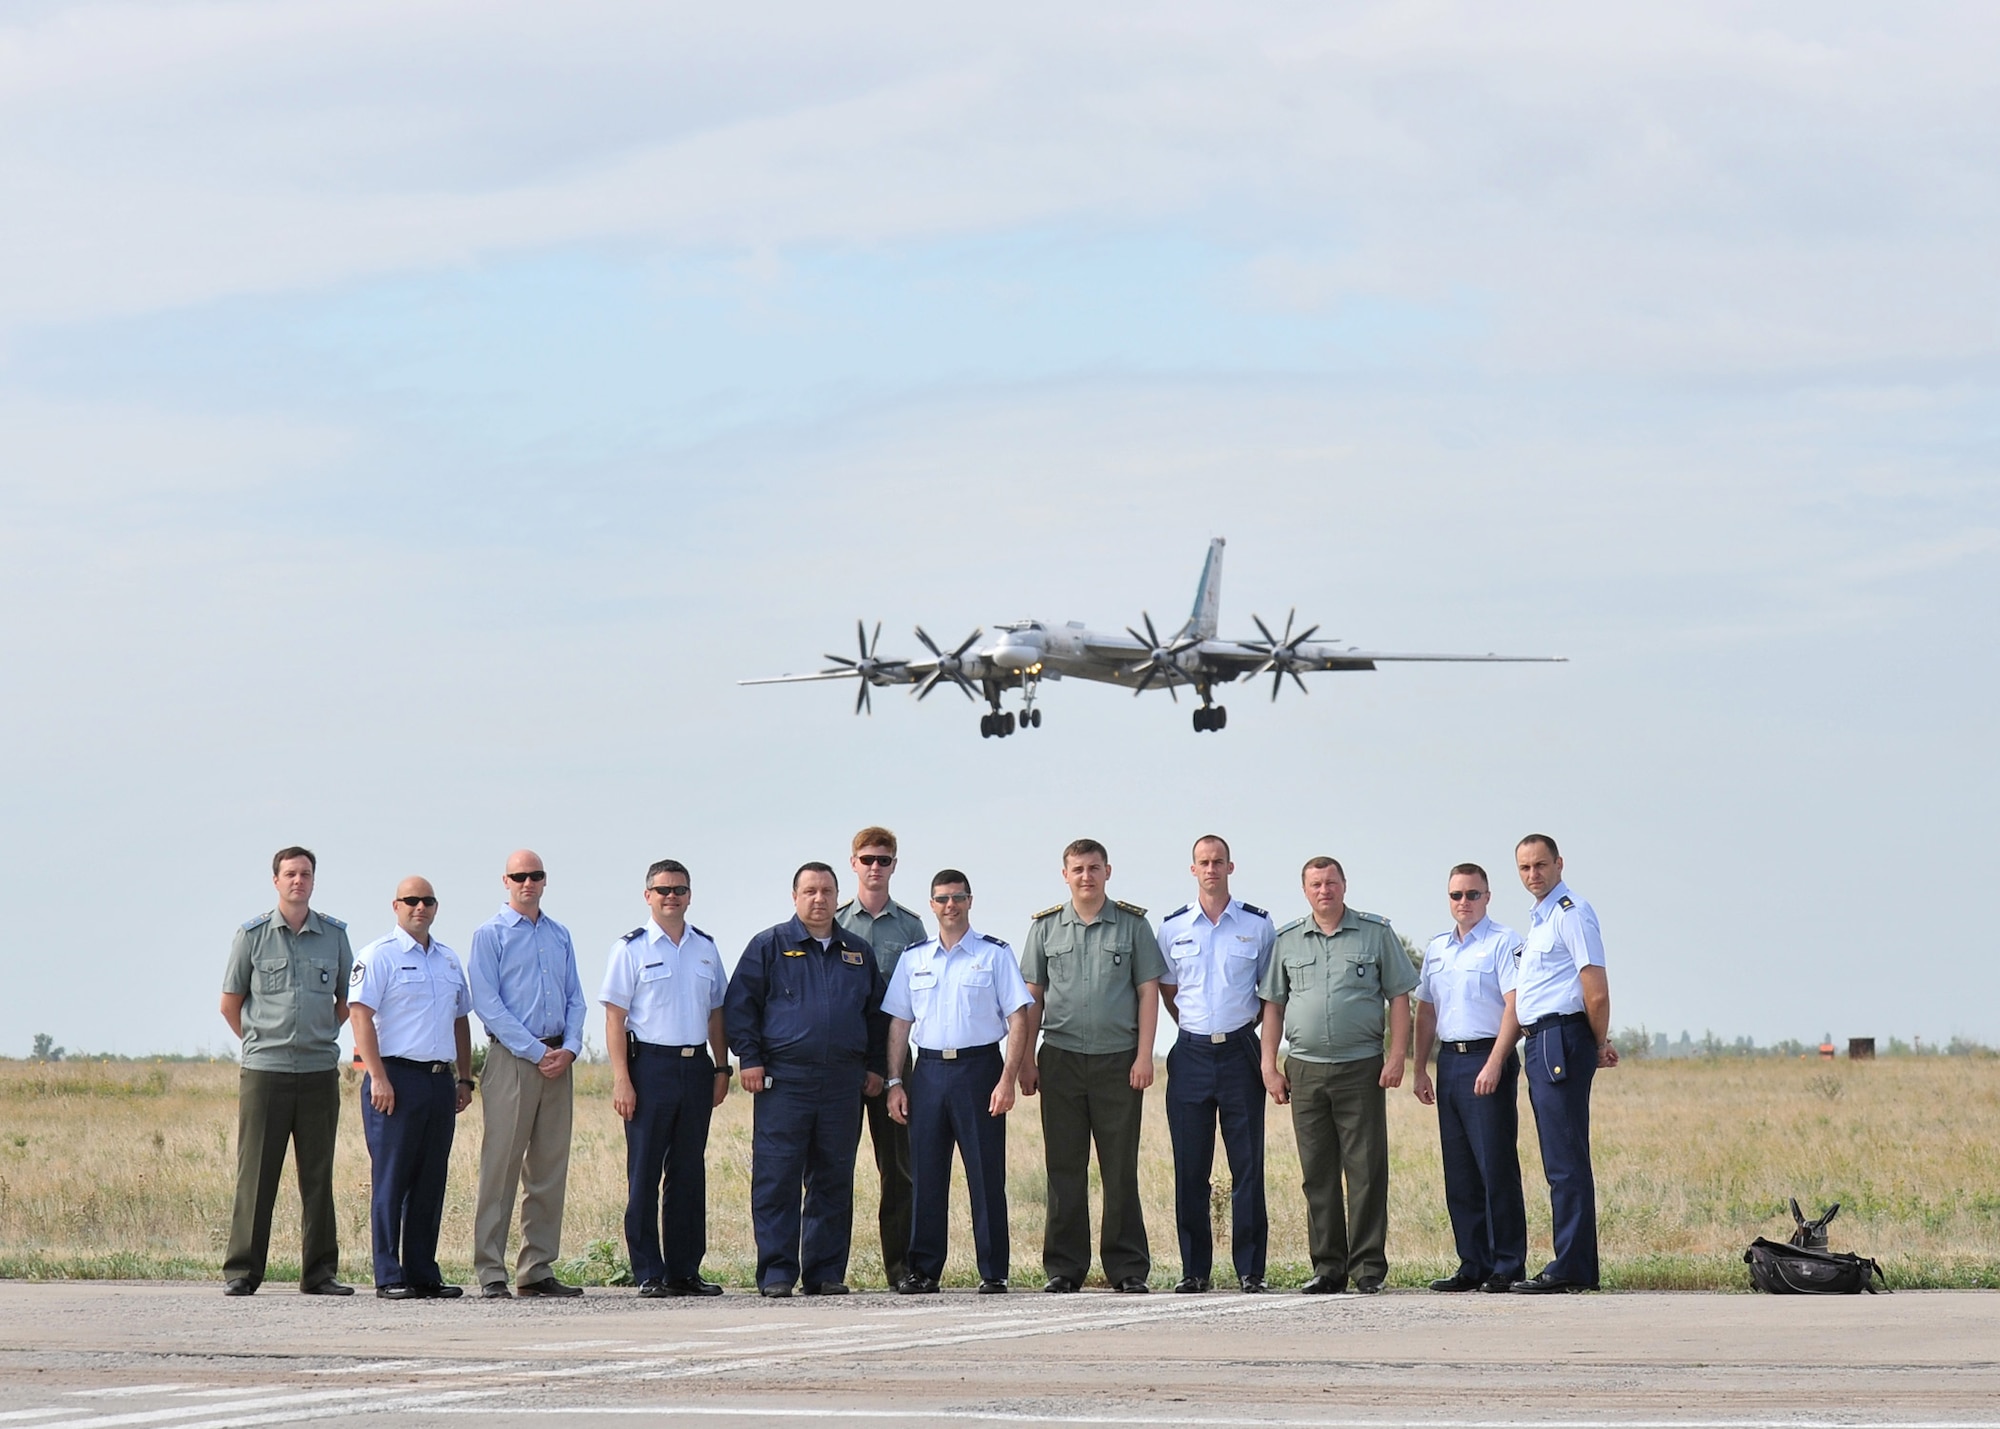 Barksdale Air Force Base members and Russian Federation air force personnel pose for a group photo as a Tu-95 “Bear” bomber prepares to land at Engels Air Base, Russia, July 25. Col. Andrew Gebara, 2nd Bomb Wing commander, and a team of experts visited the Russian base to determine the suitability of the airfield for B-52H Stratofortress operations. (Courtesy photo)